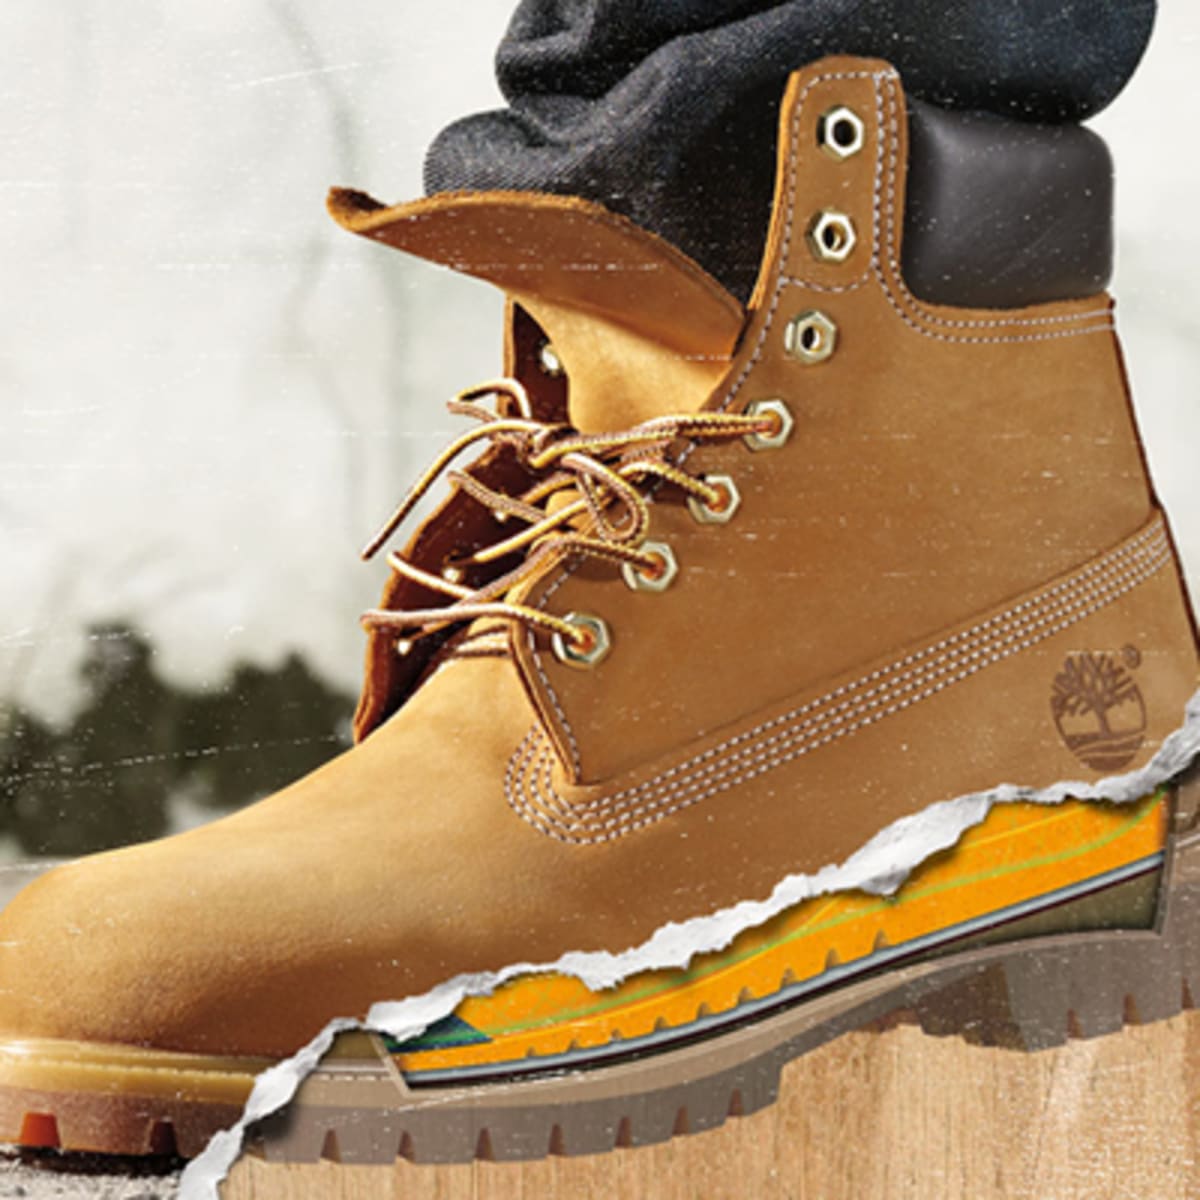 army fatigue timberland boots